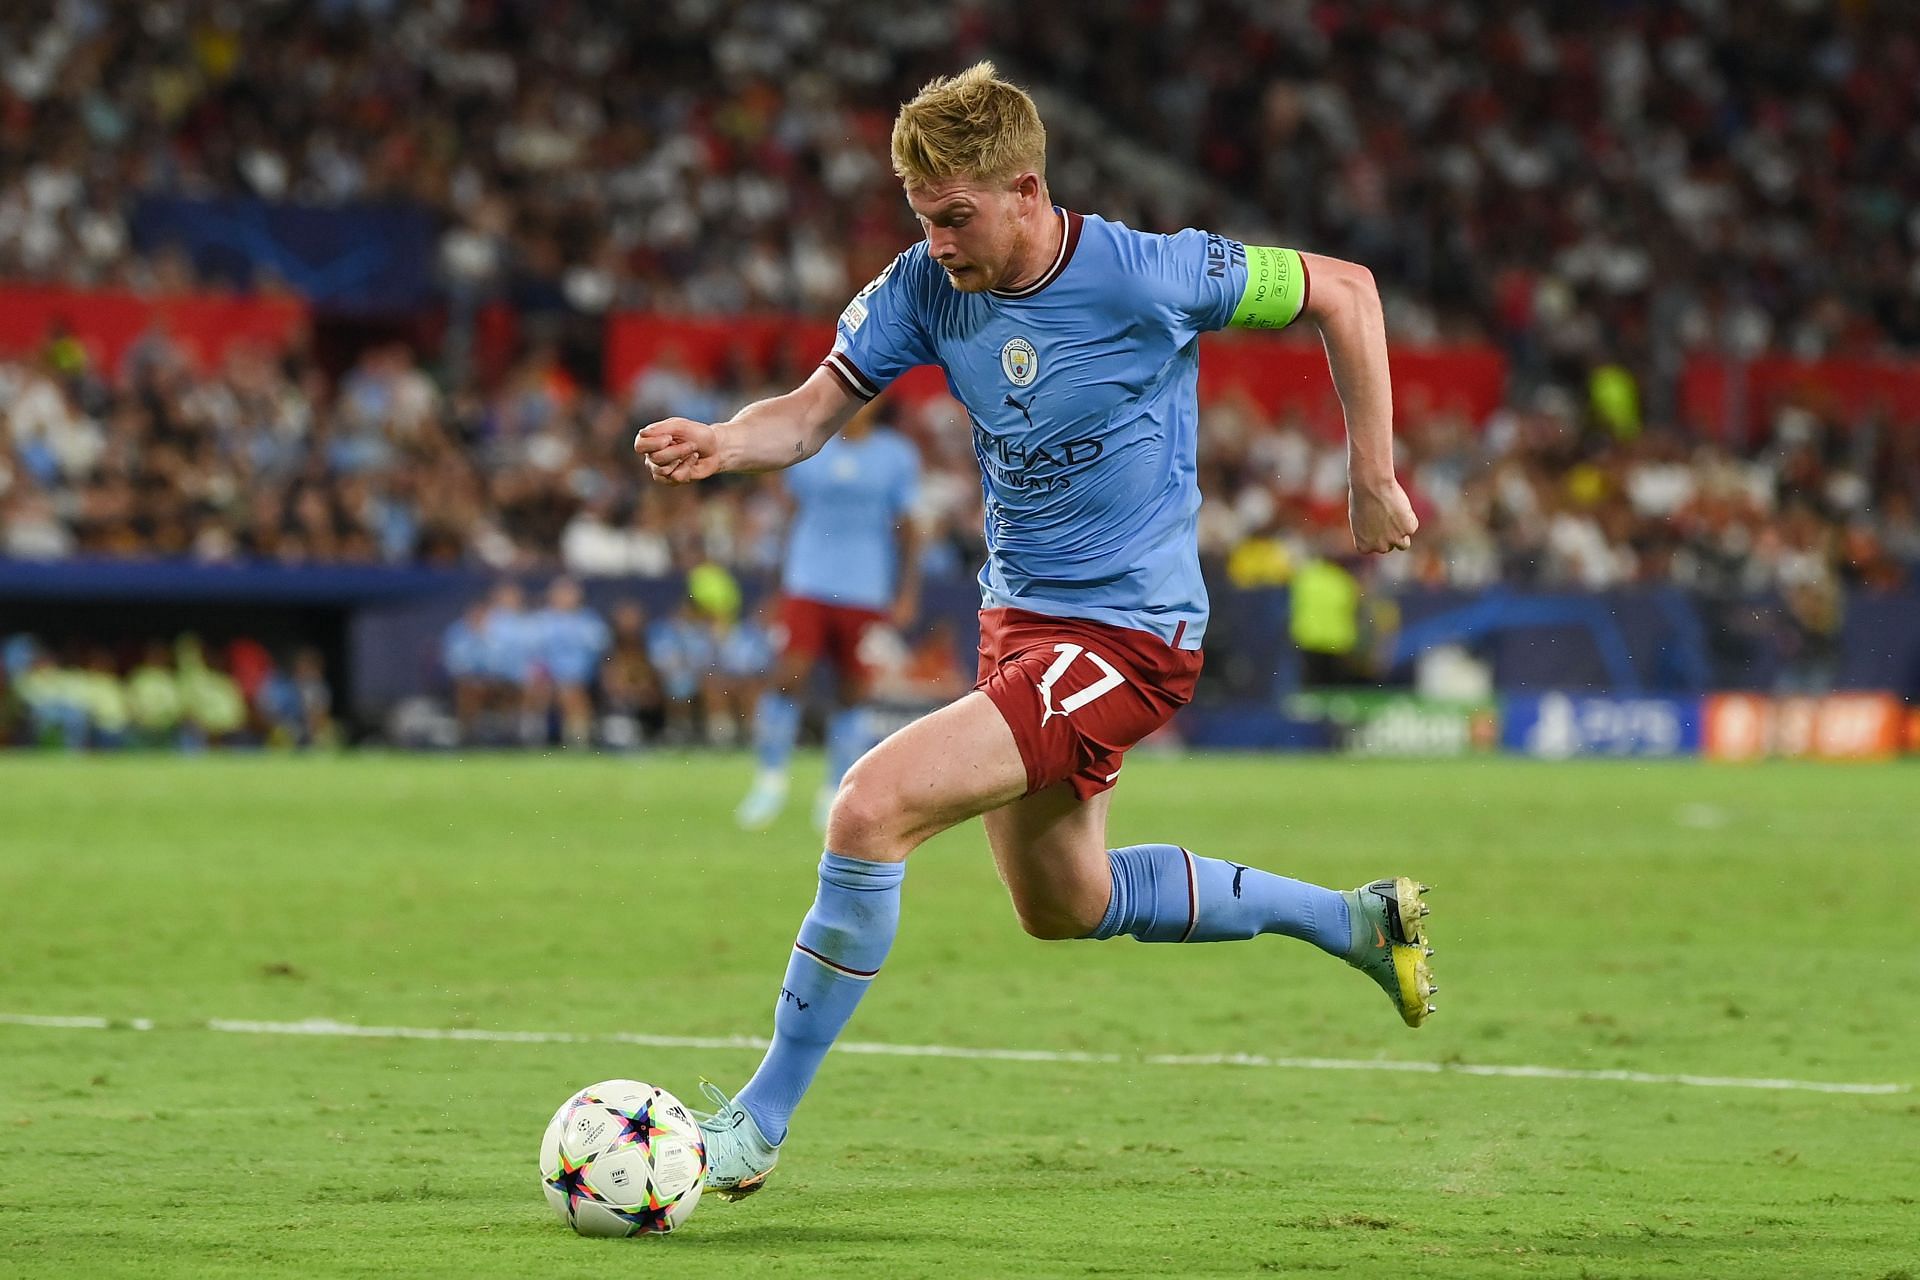 De Bruyne has been impressive for Manchester City this season